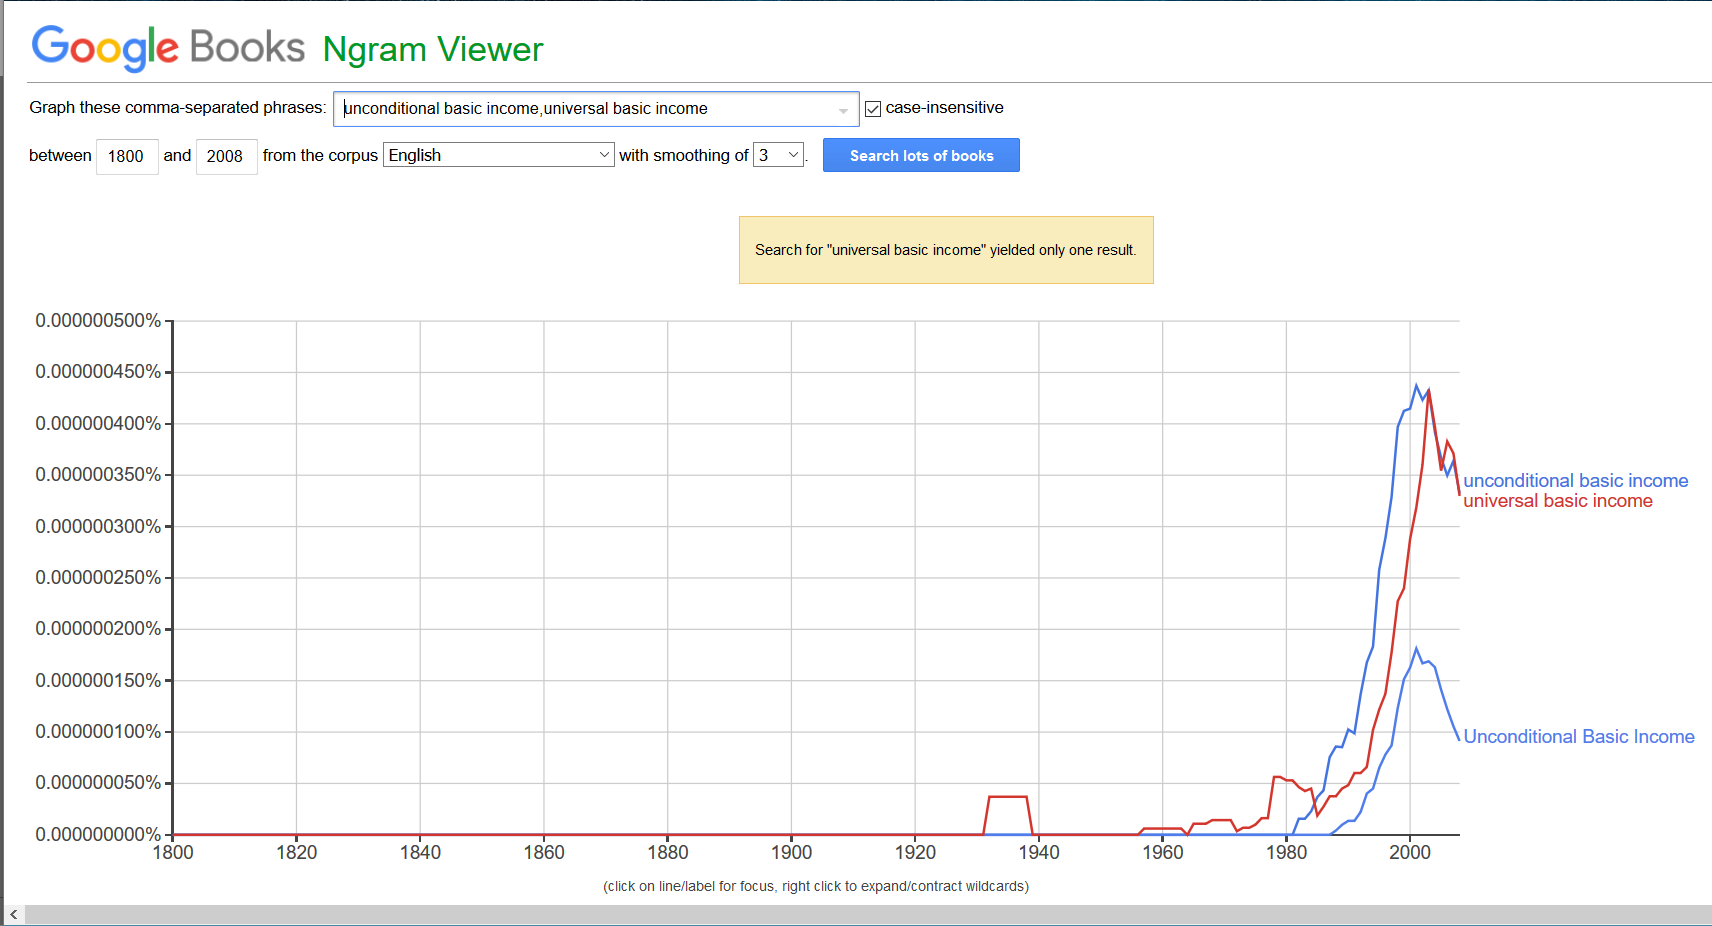 Figure 1. Google Books Ngram Viewer for terms “universal basic income” and “unconditional basic income” 